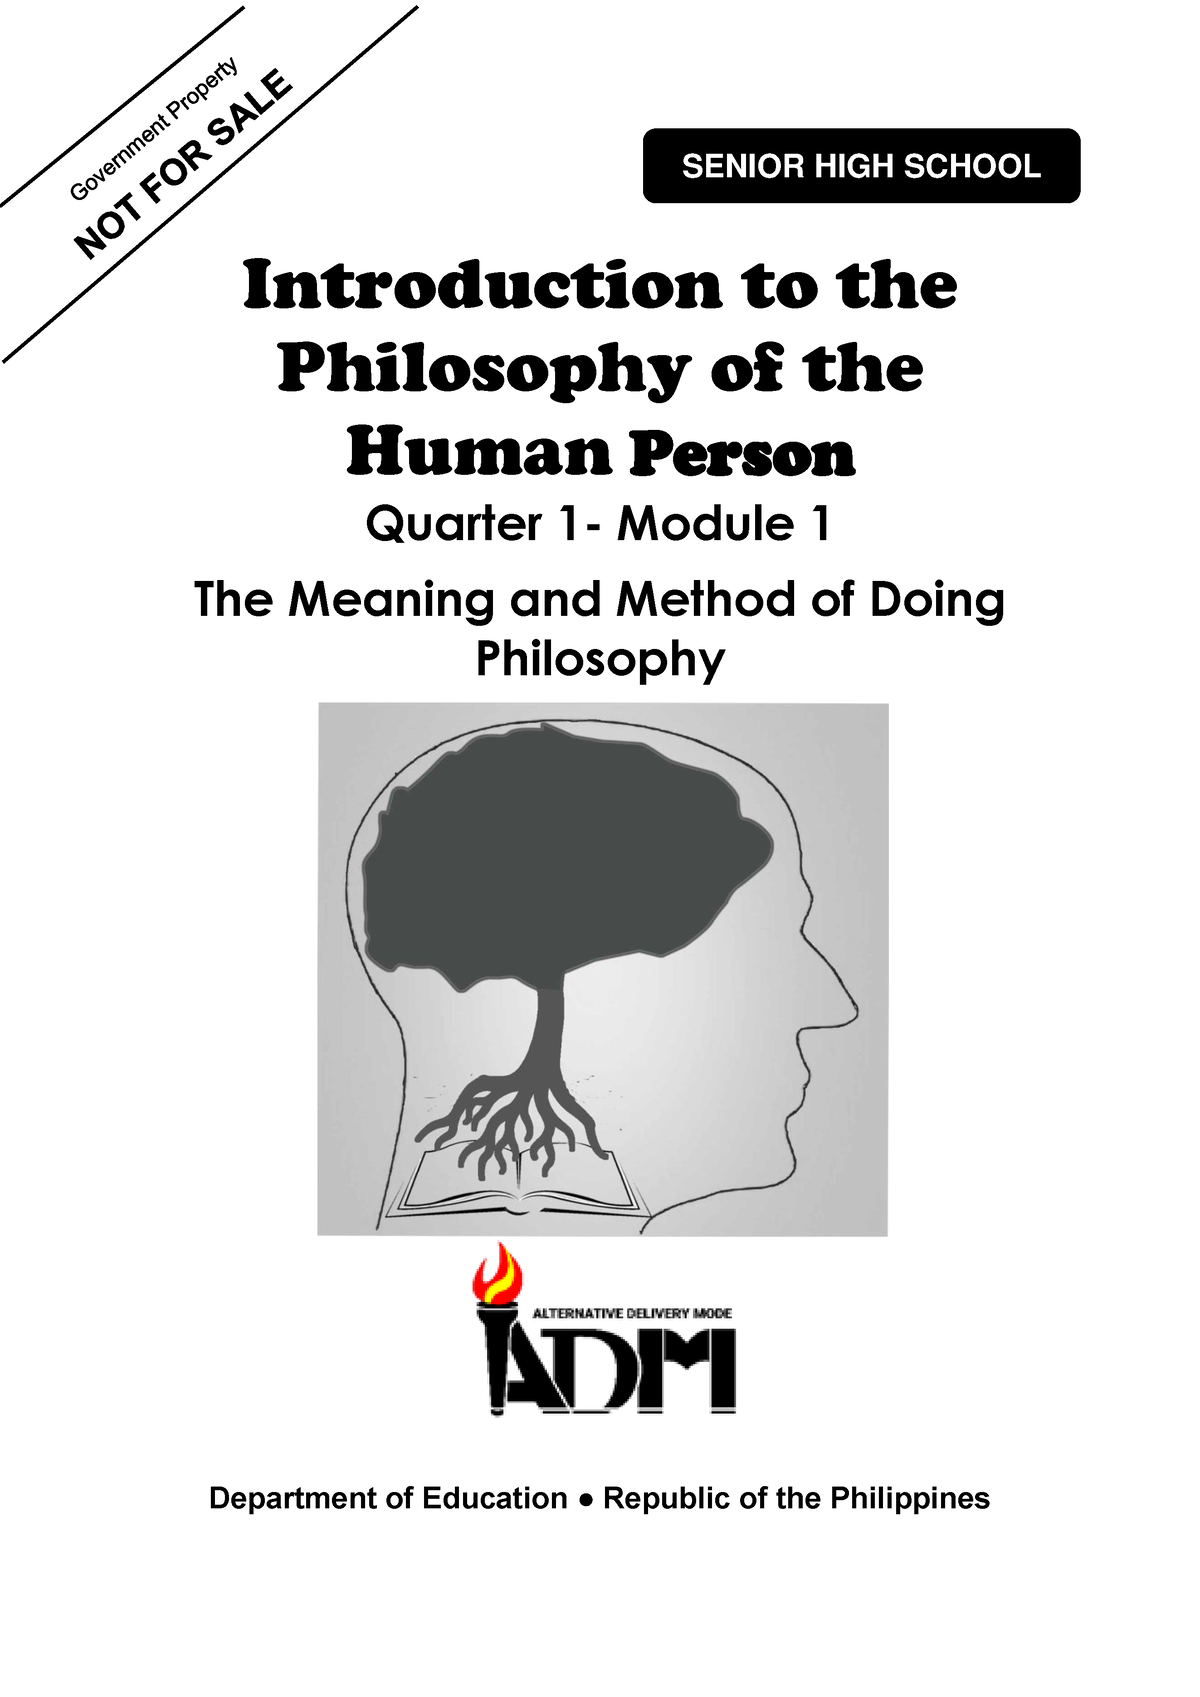 Philo Mod1 Q1 Introduction To The Philosophy Of The Human Person V3 1 Introduction To The 9475